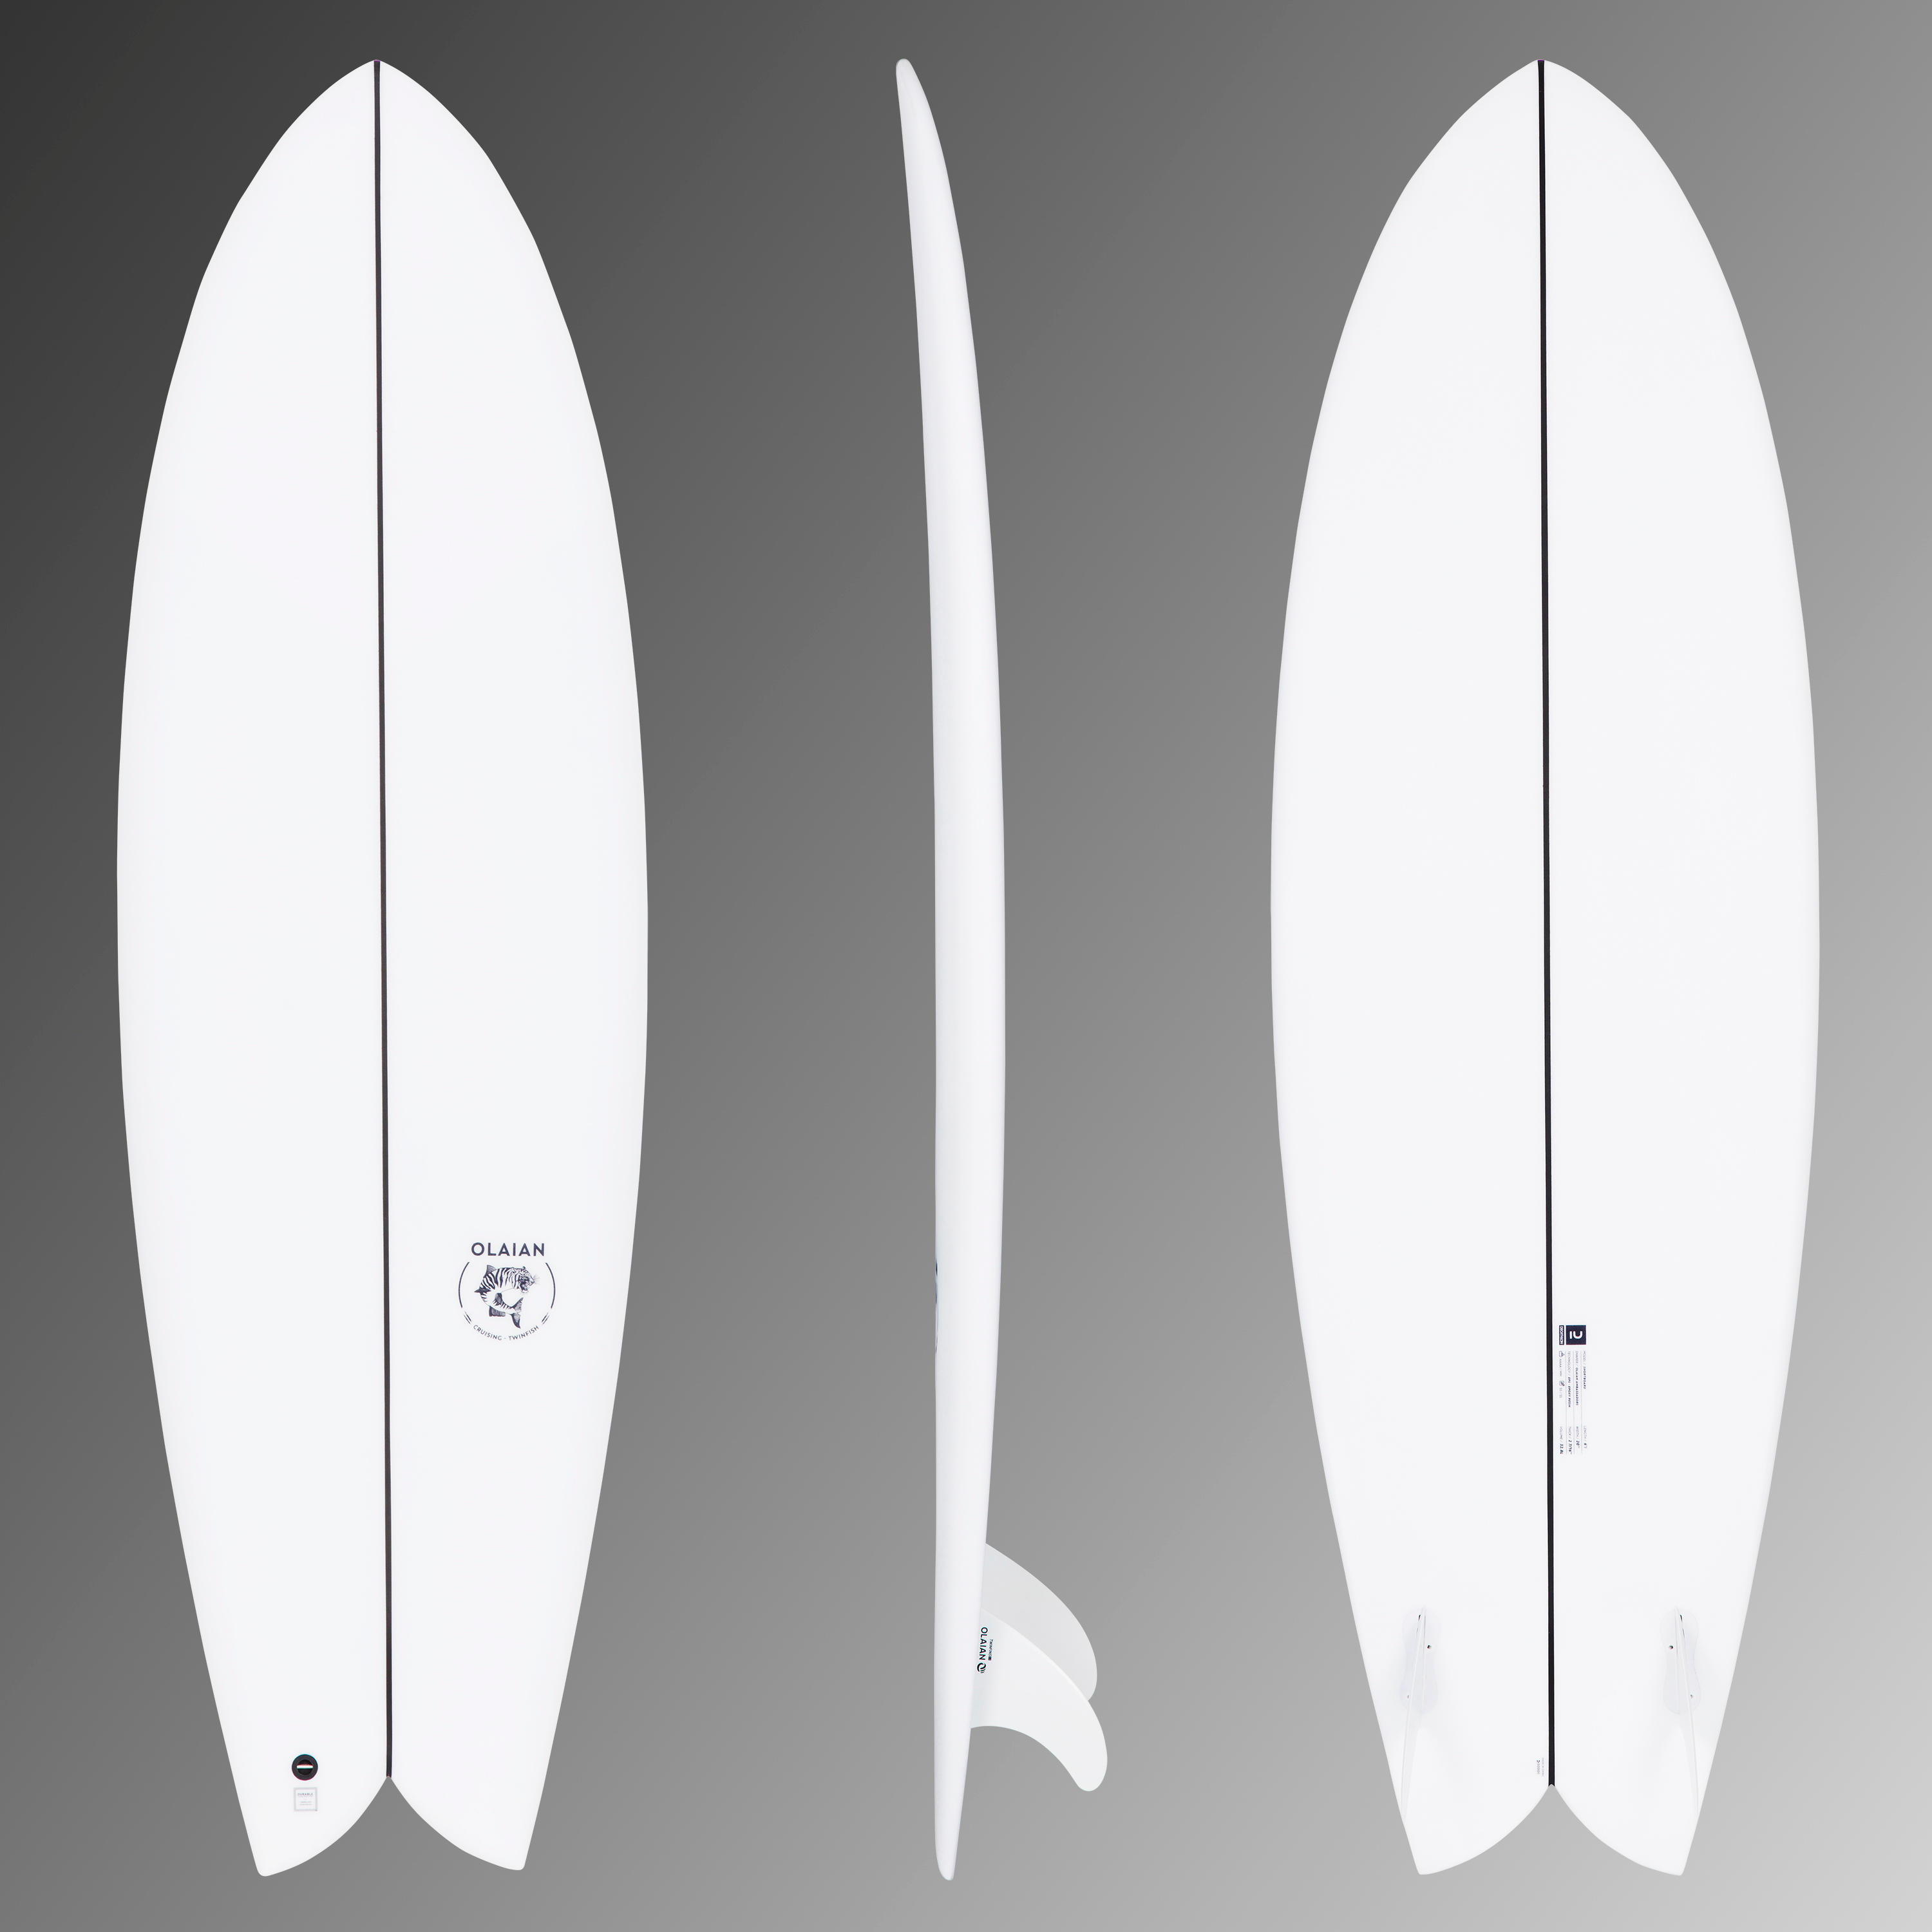 FISH 900 6'1" 42 L. Supplied with 2 twin fins. 1/17